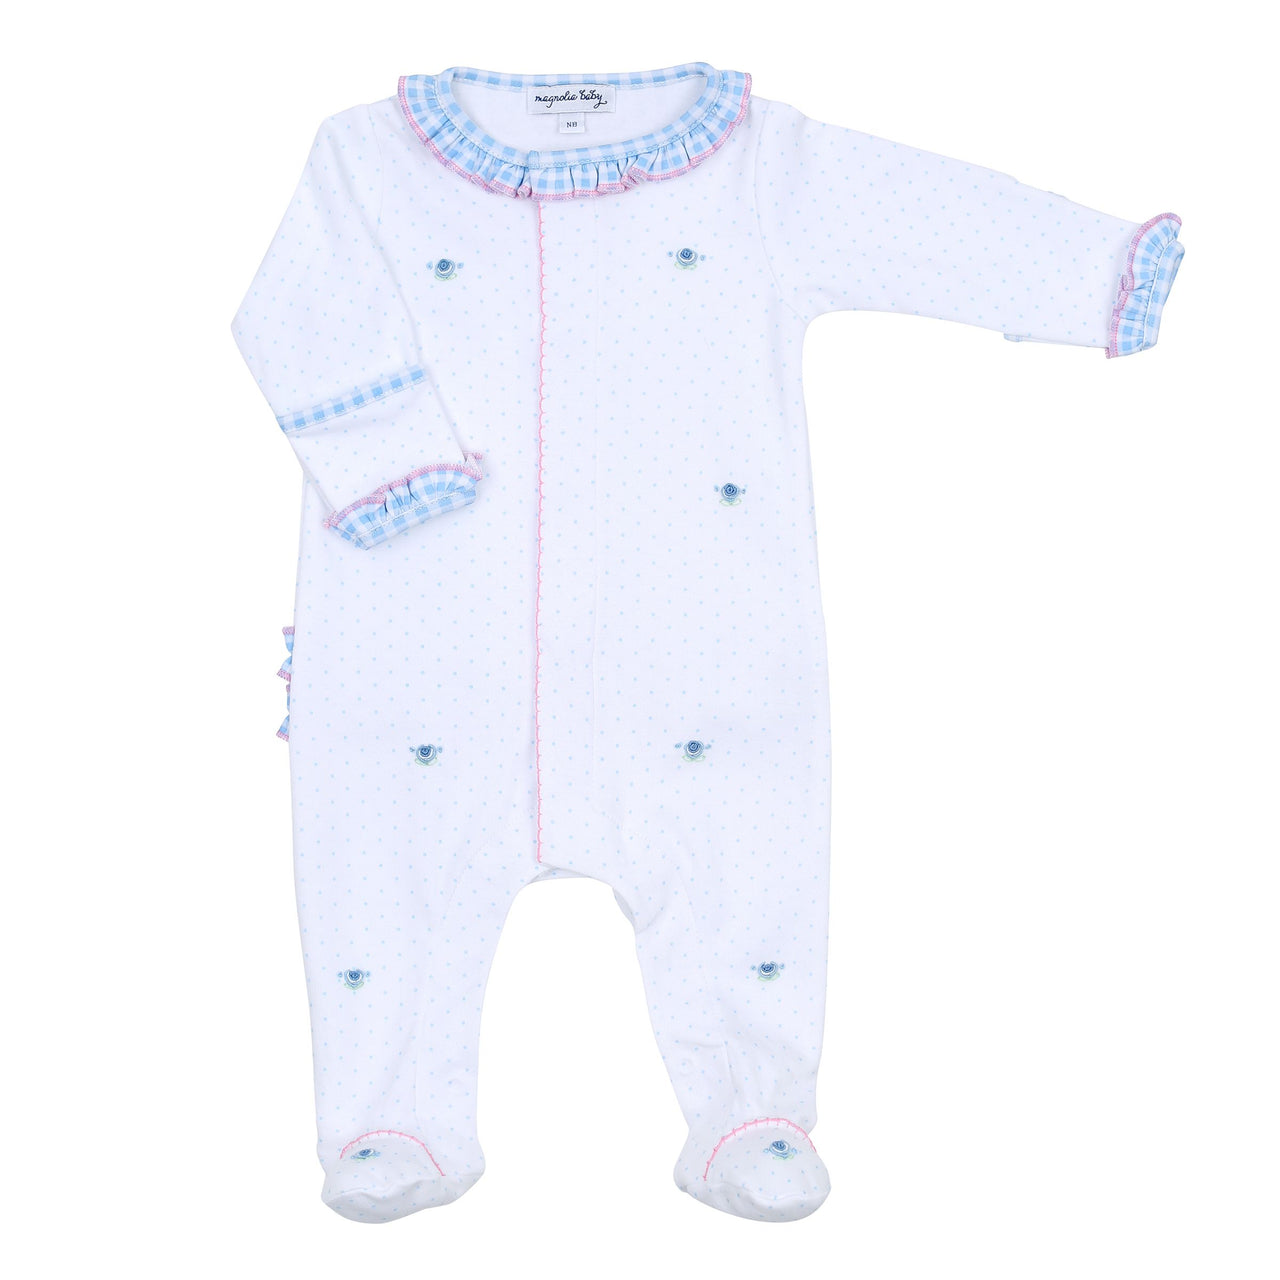 Magnolia Baby Anna's Classics Scattered Ruffle Footie 1313-410 5101